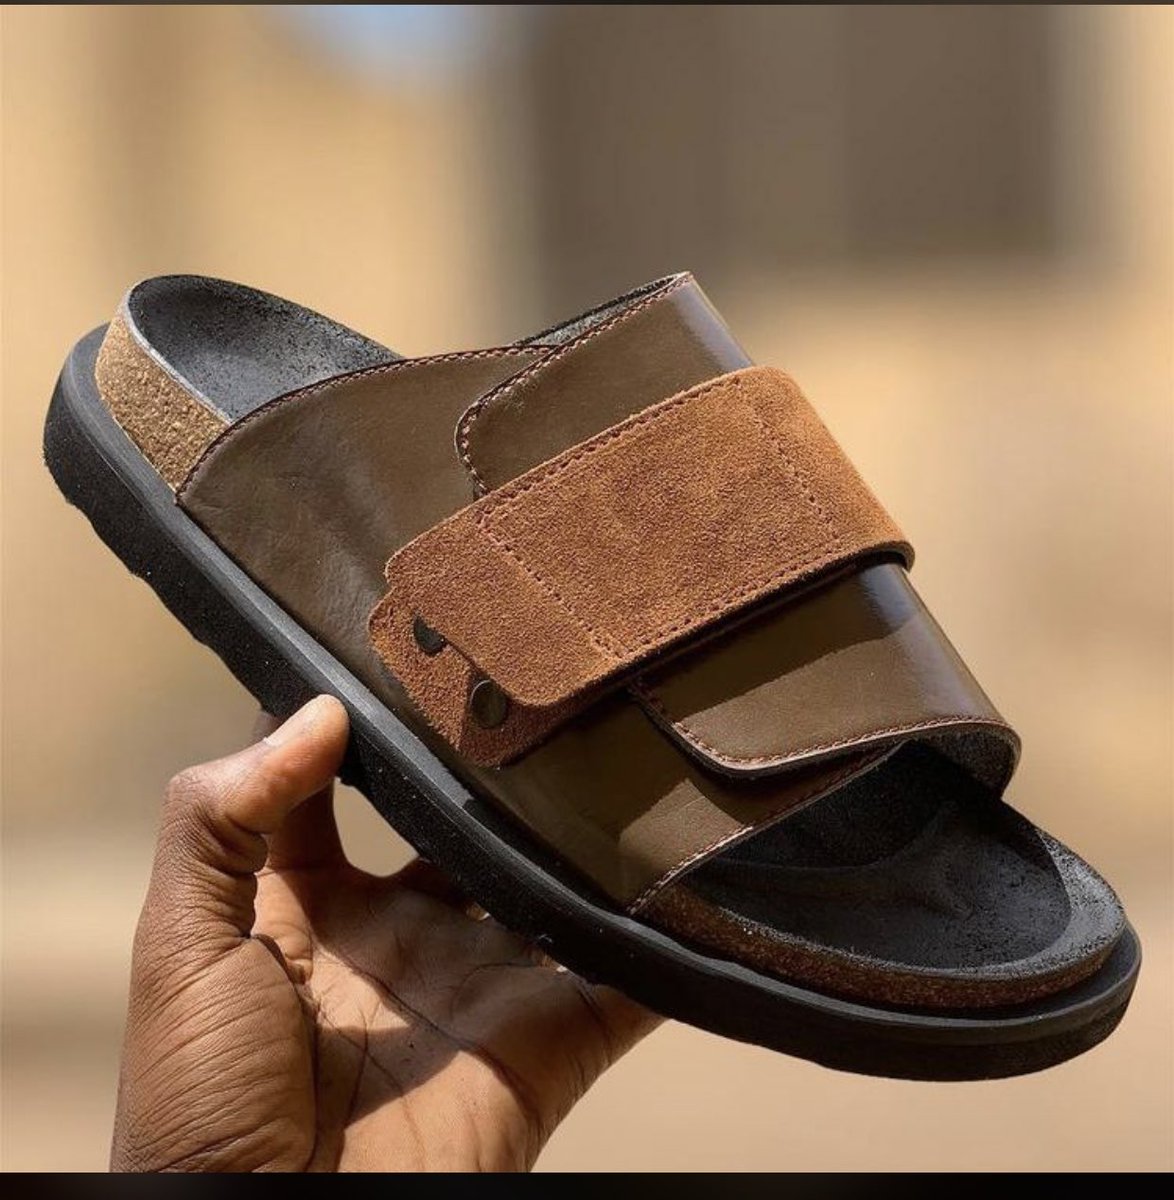 This beauty 😍 is available for creation in all sizes Price: 12,000 Kindly send me a dm or click link in bio to place an order